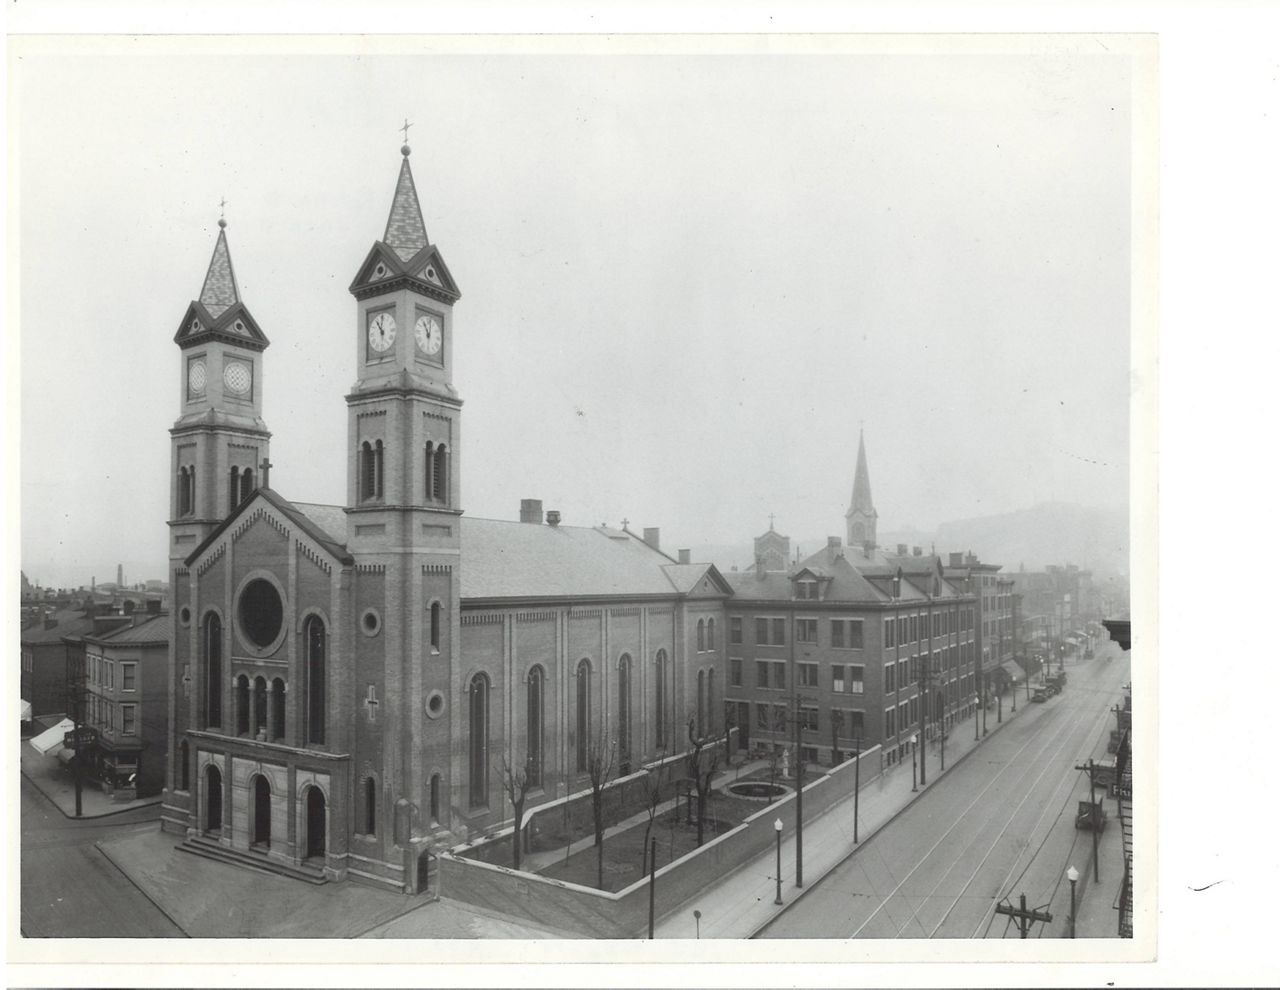 St. Francis Church and Friary has stood at the corner of Liberty and Vine for decades. (Franciscan Archives, Province of St. John the Baptist, Cincinnati, Ohio)